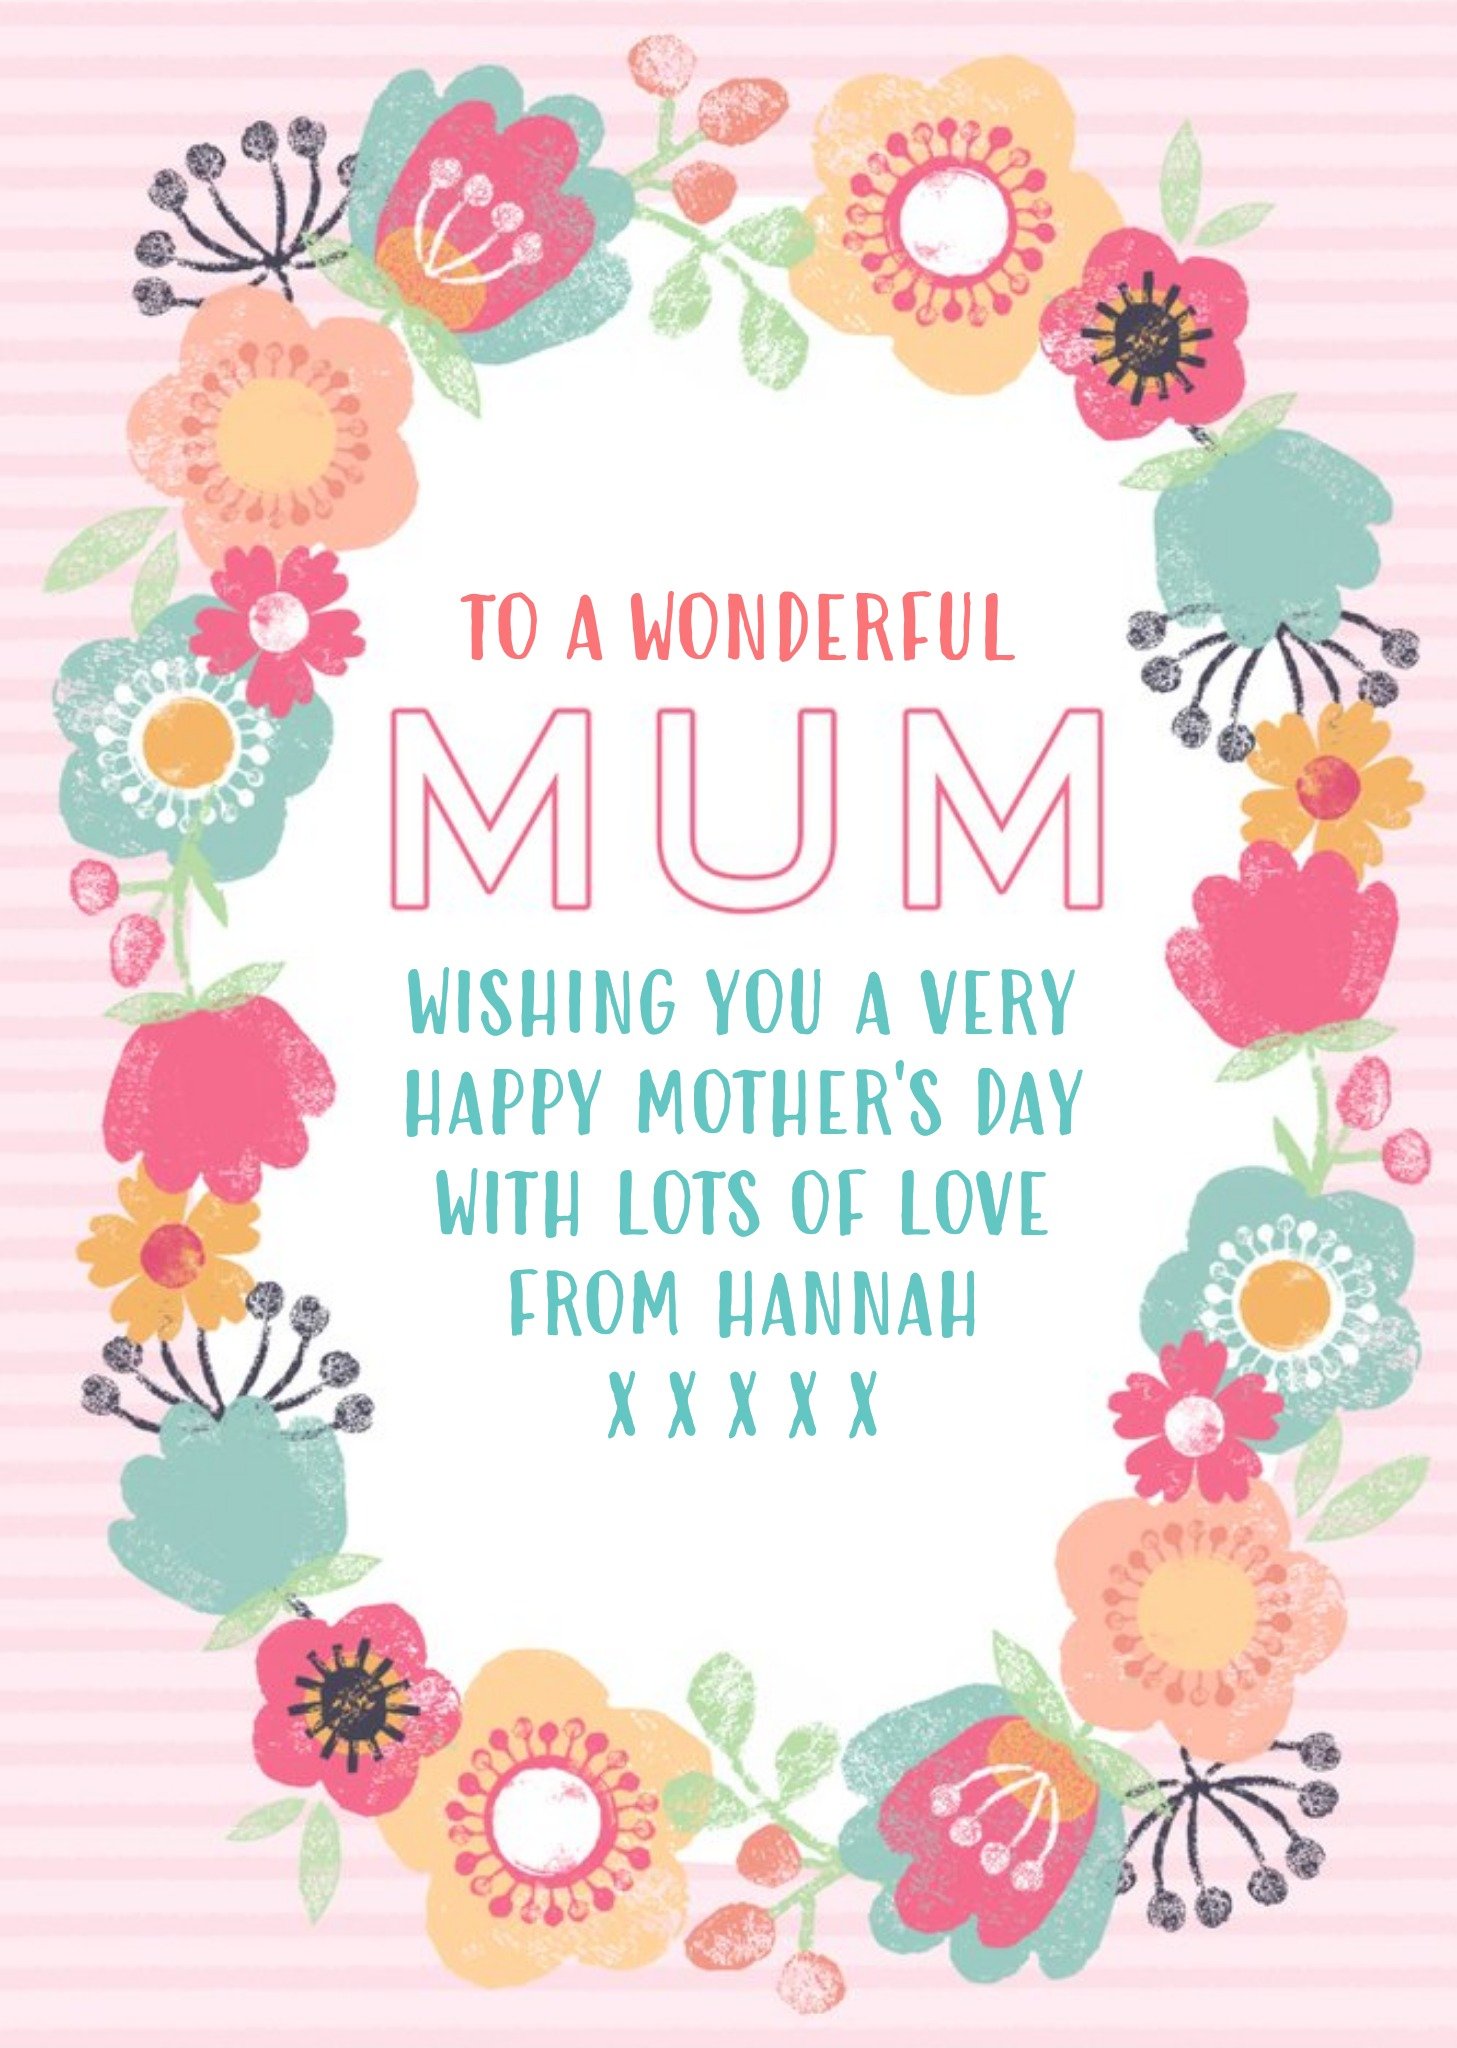 Moonpig Bright Floral Border To A Wonderful Mum Happy Mother's Day Card Ecard